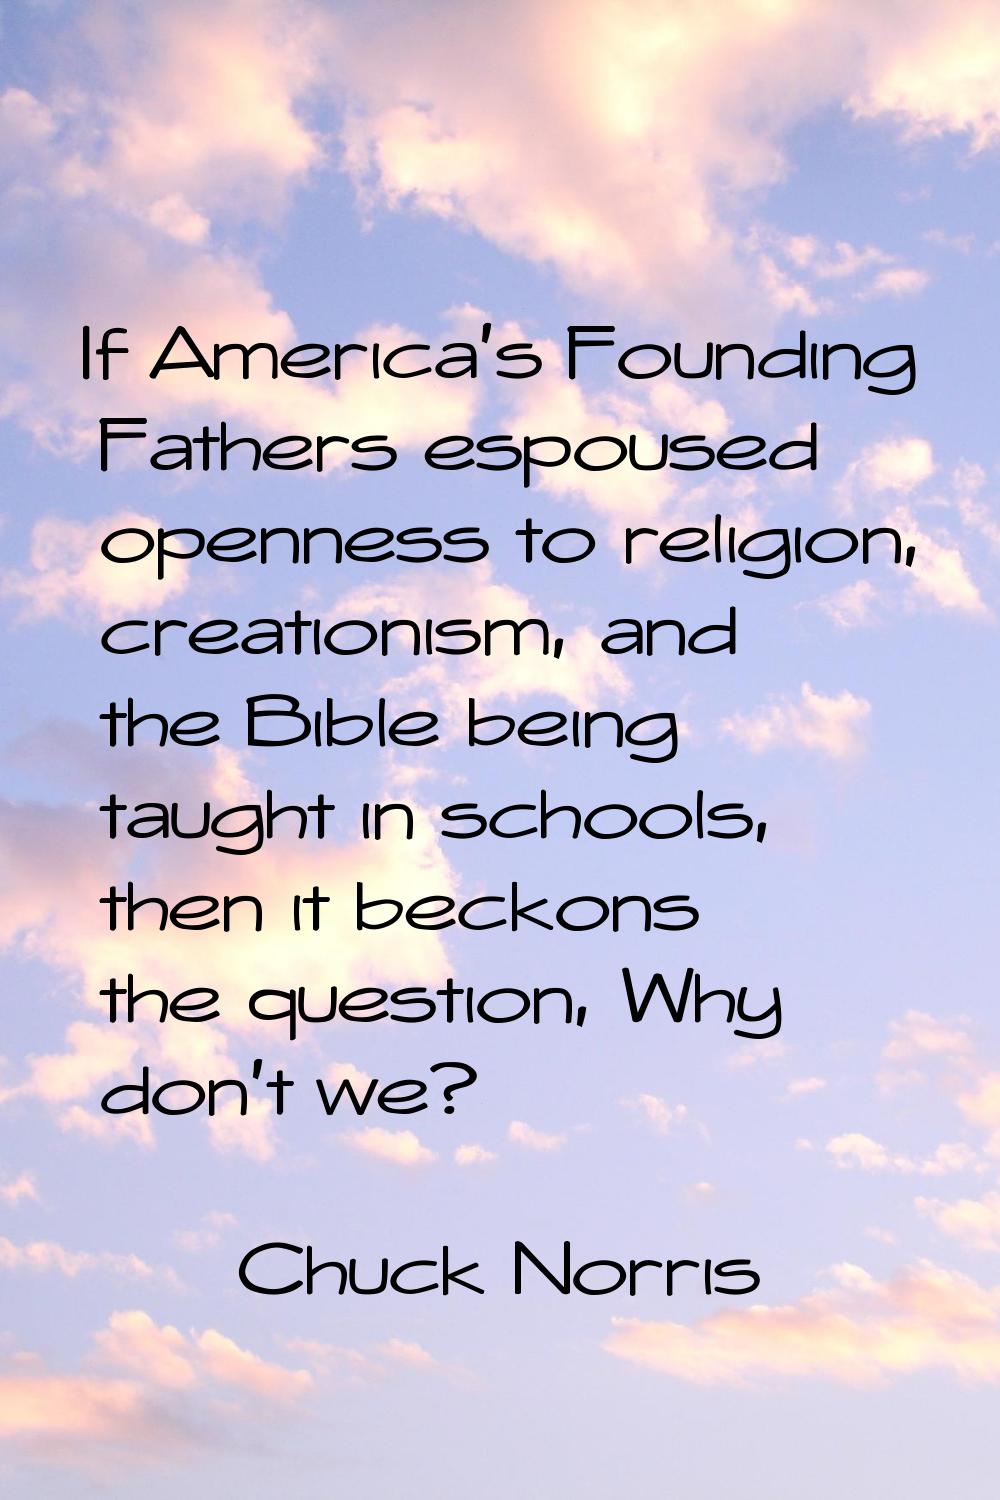 If America's Founding Fathers espoused openness to religion, creationism, and the Bible being taugh